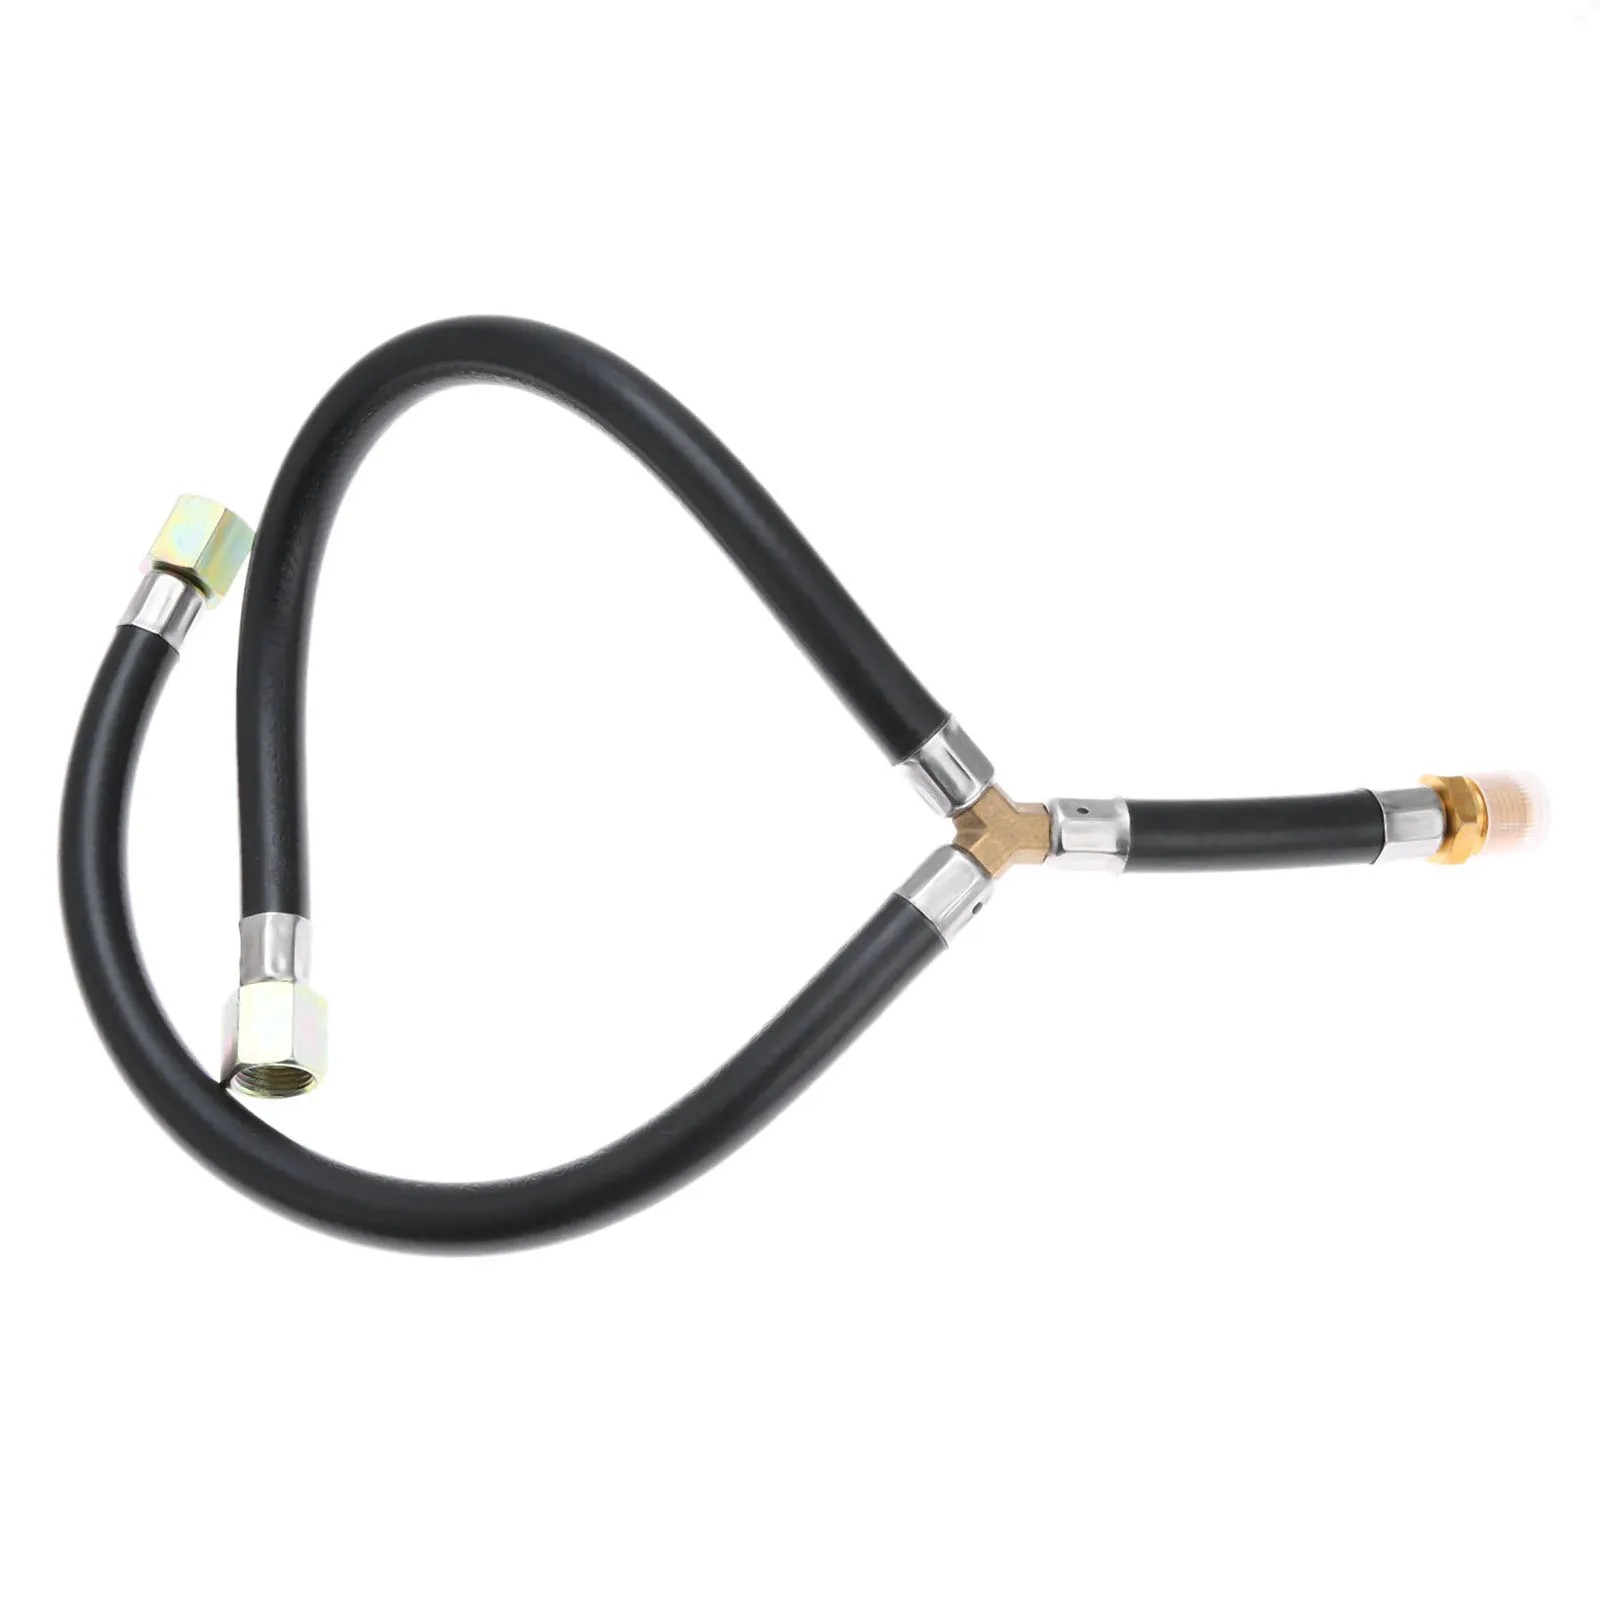 1 Pc Propane 3/8 Inch Flare Gas Barbecue GRILL Connection Flexible Hose, Y Splitter Hose Assembly Parts Inlet Pipe for BBQ Stove